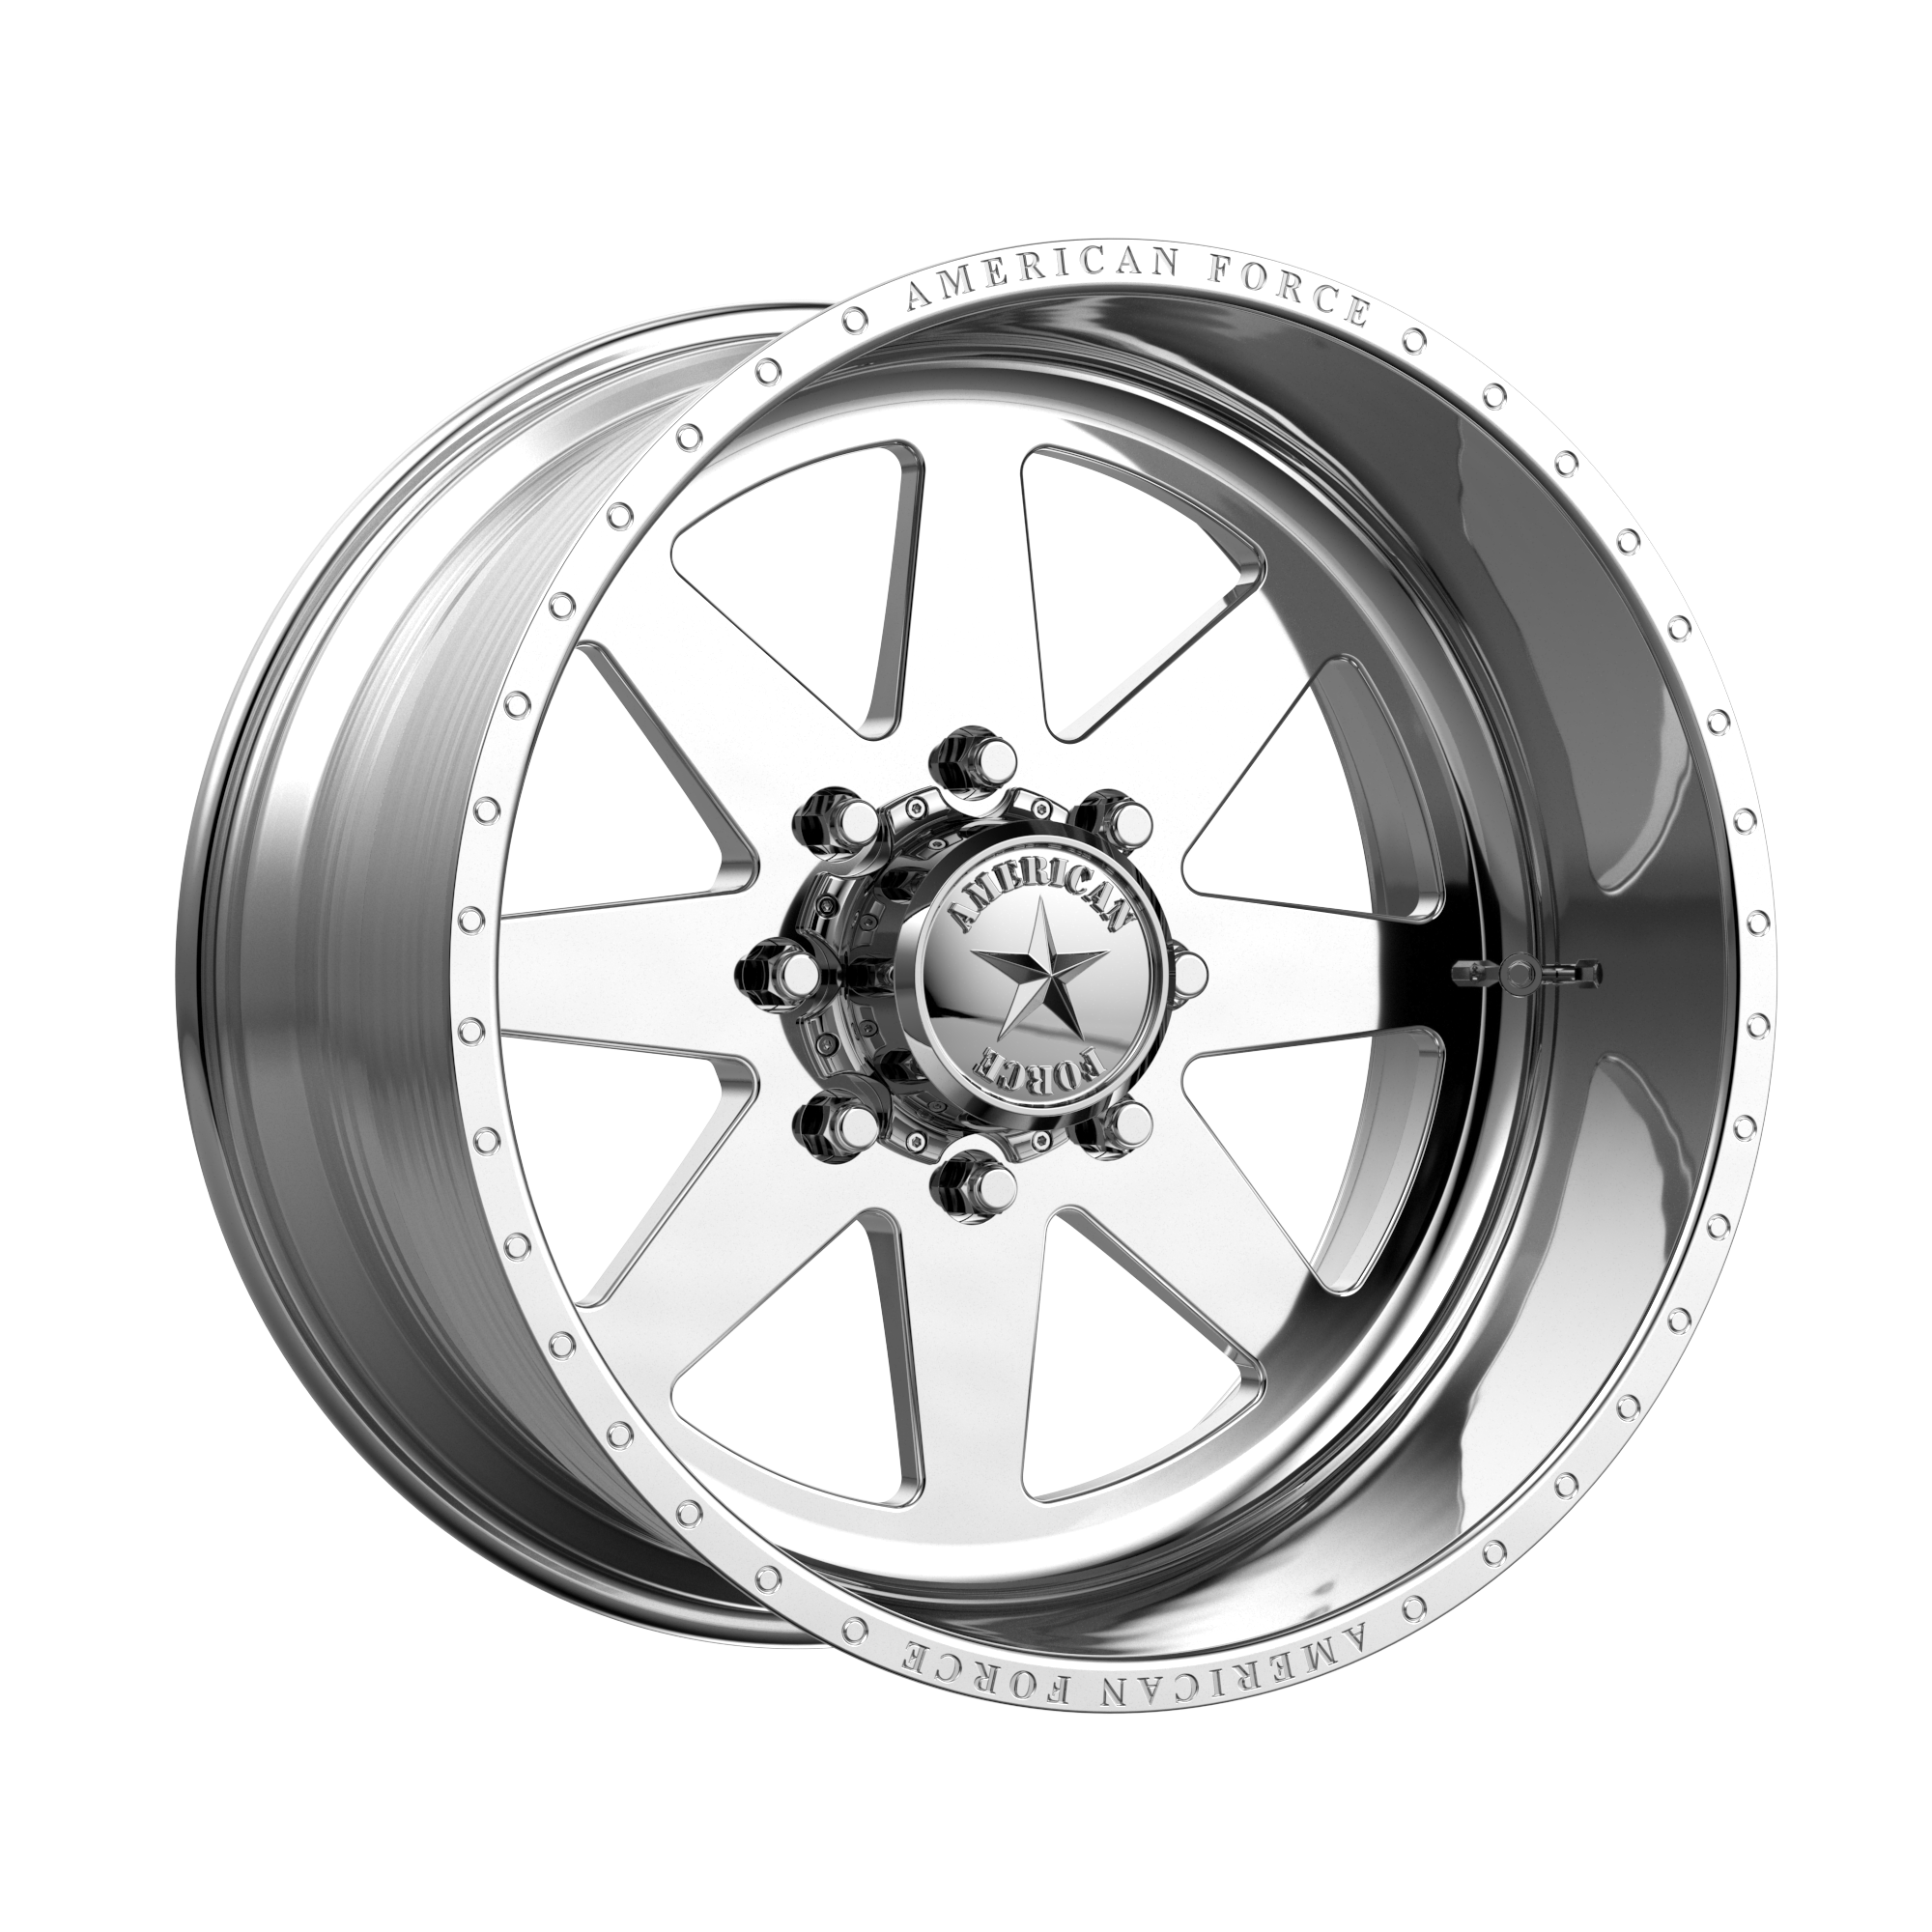 INDEPENDENCE SS 24x14 6x135.00 POLISHED (-73 mm) - Tires and Engine Performance